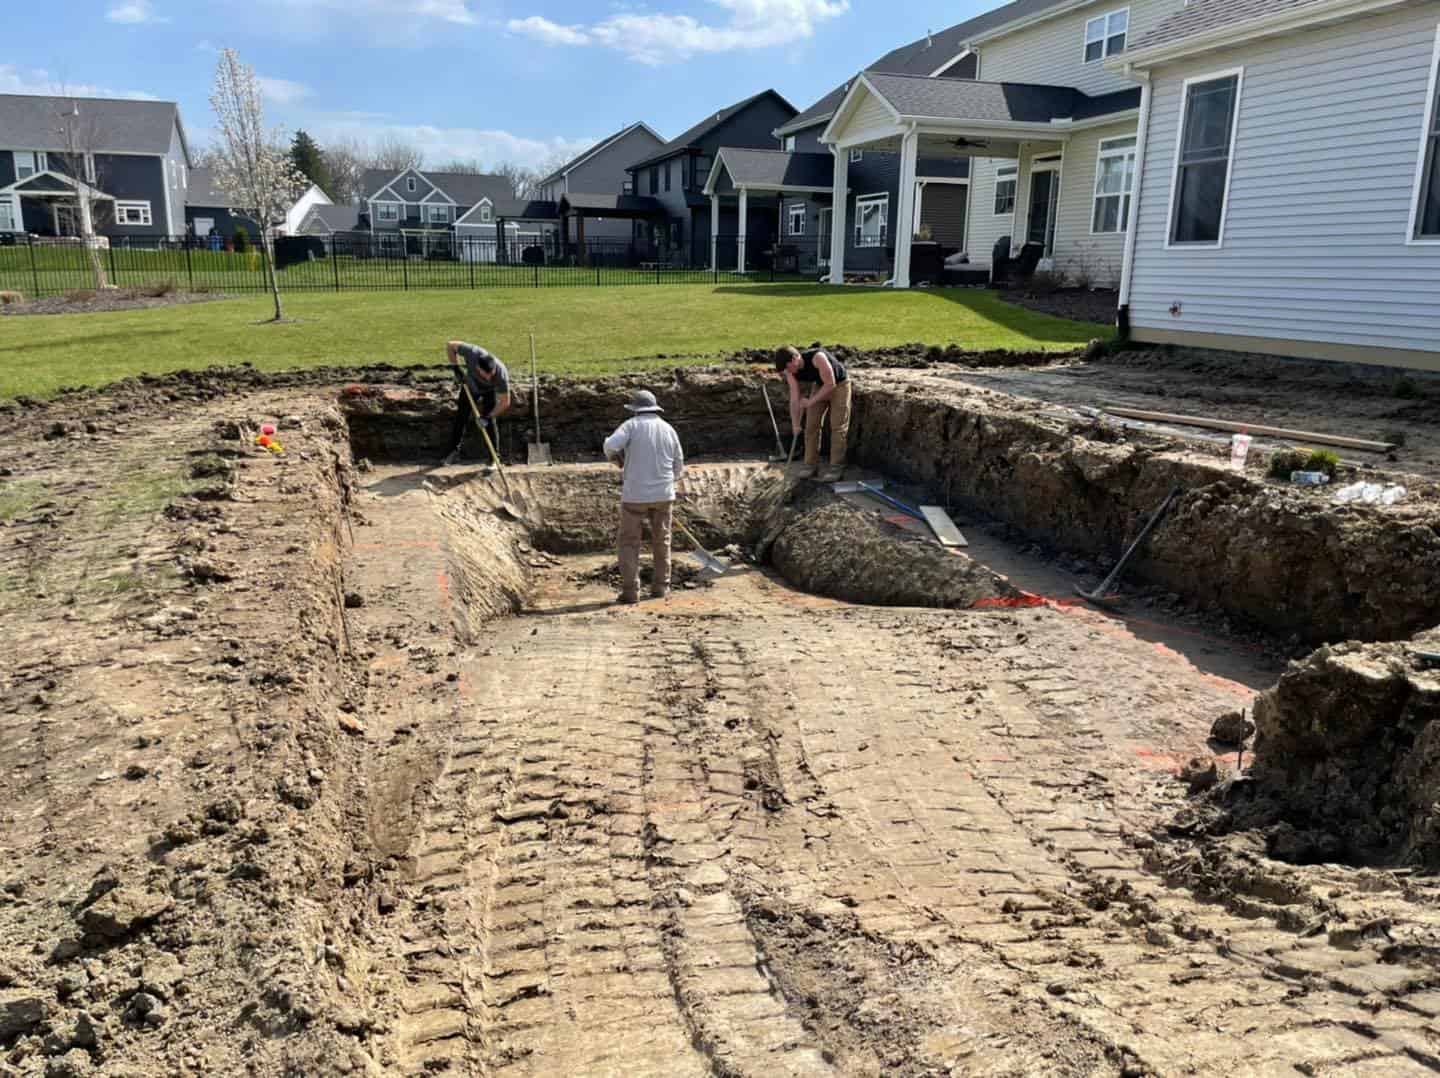 A group of people working on a pool in a backyard.